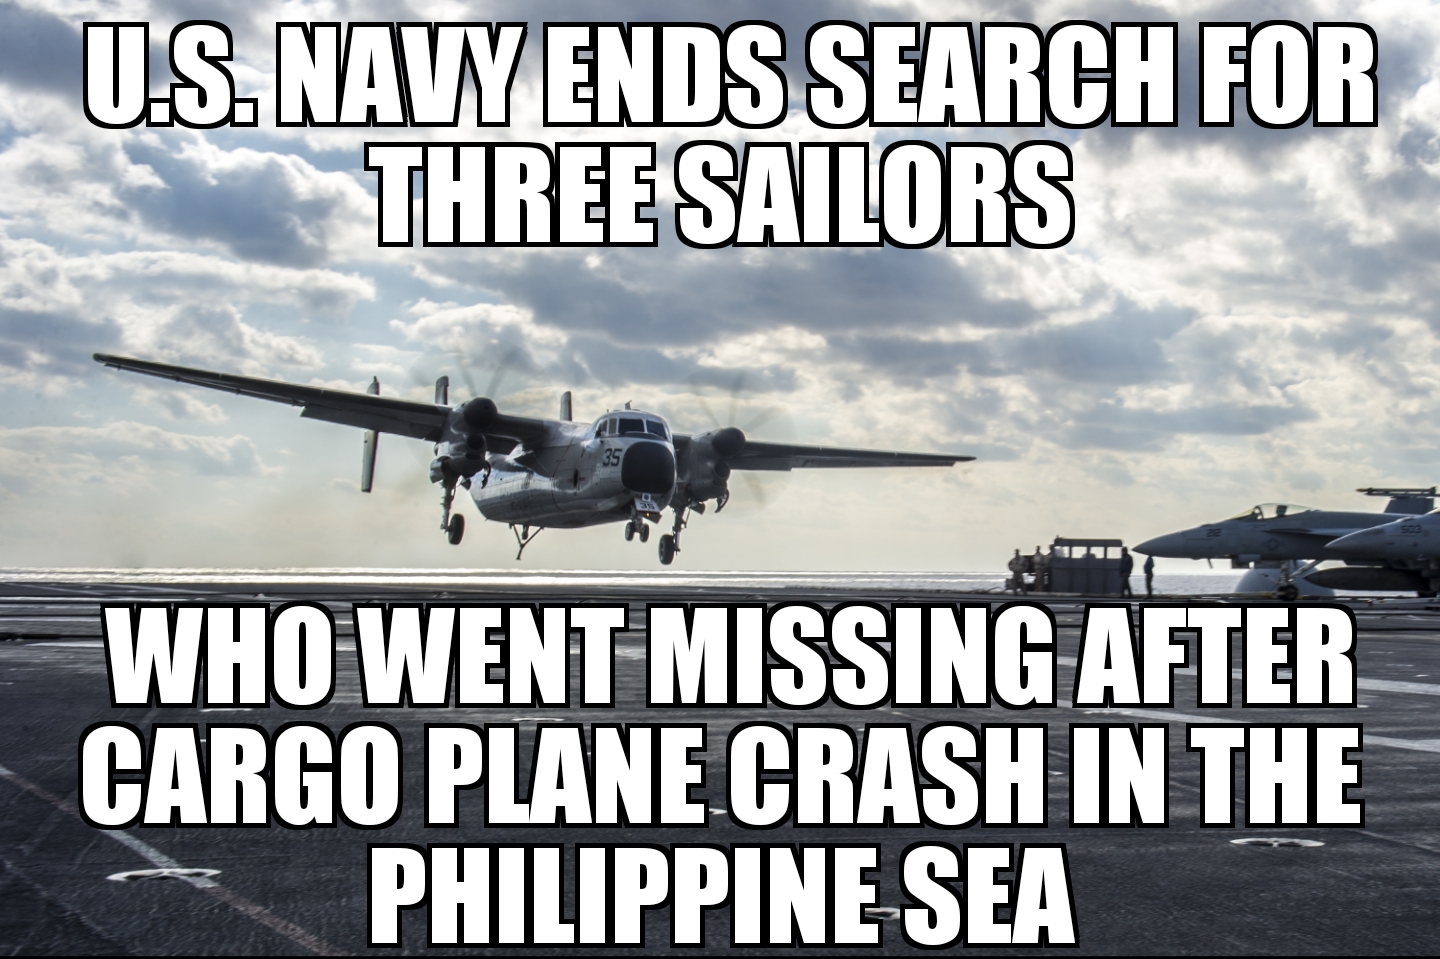 Navy ends search for missing sailors